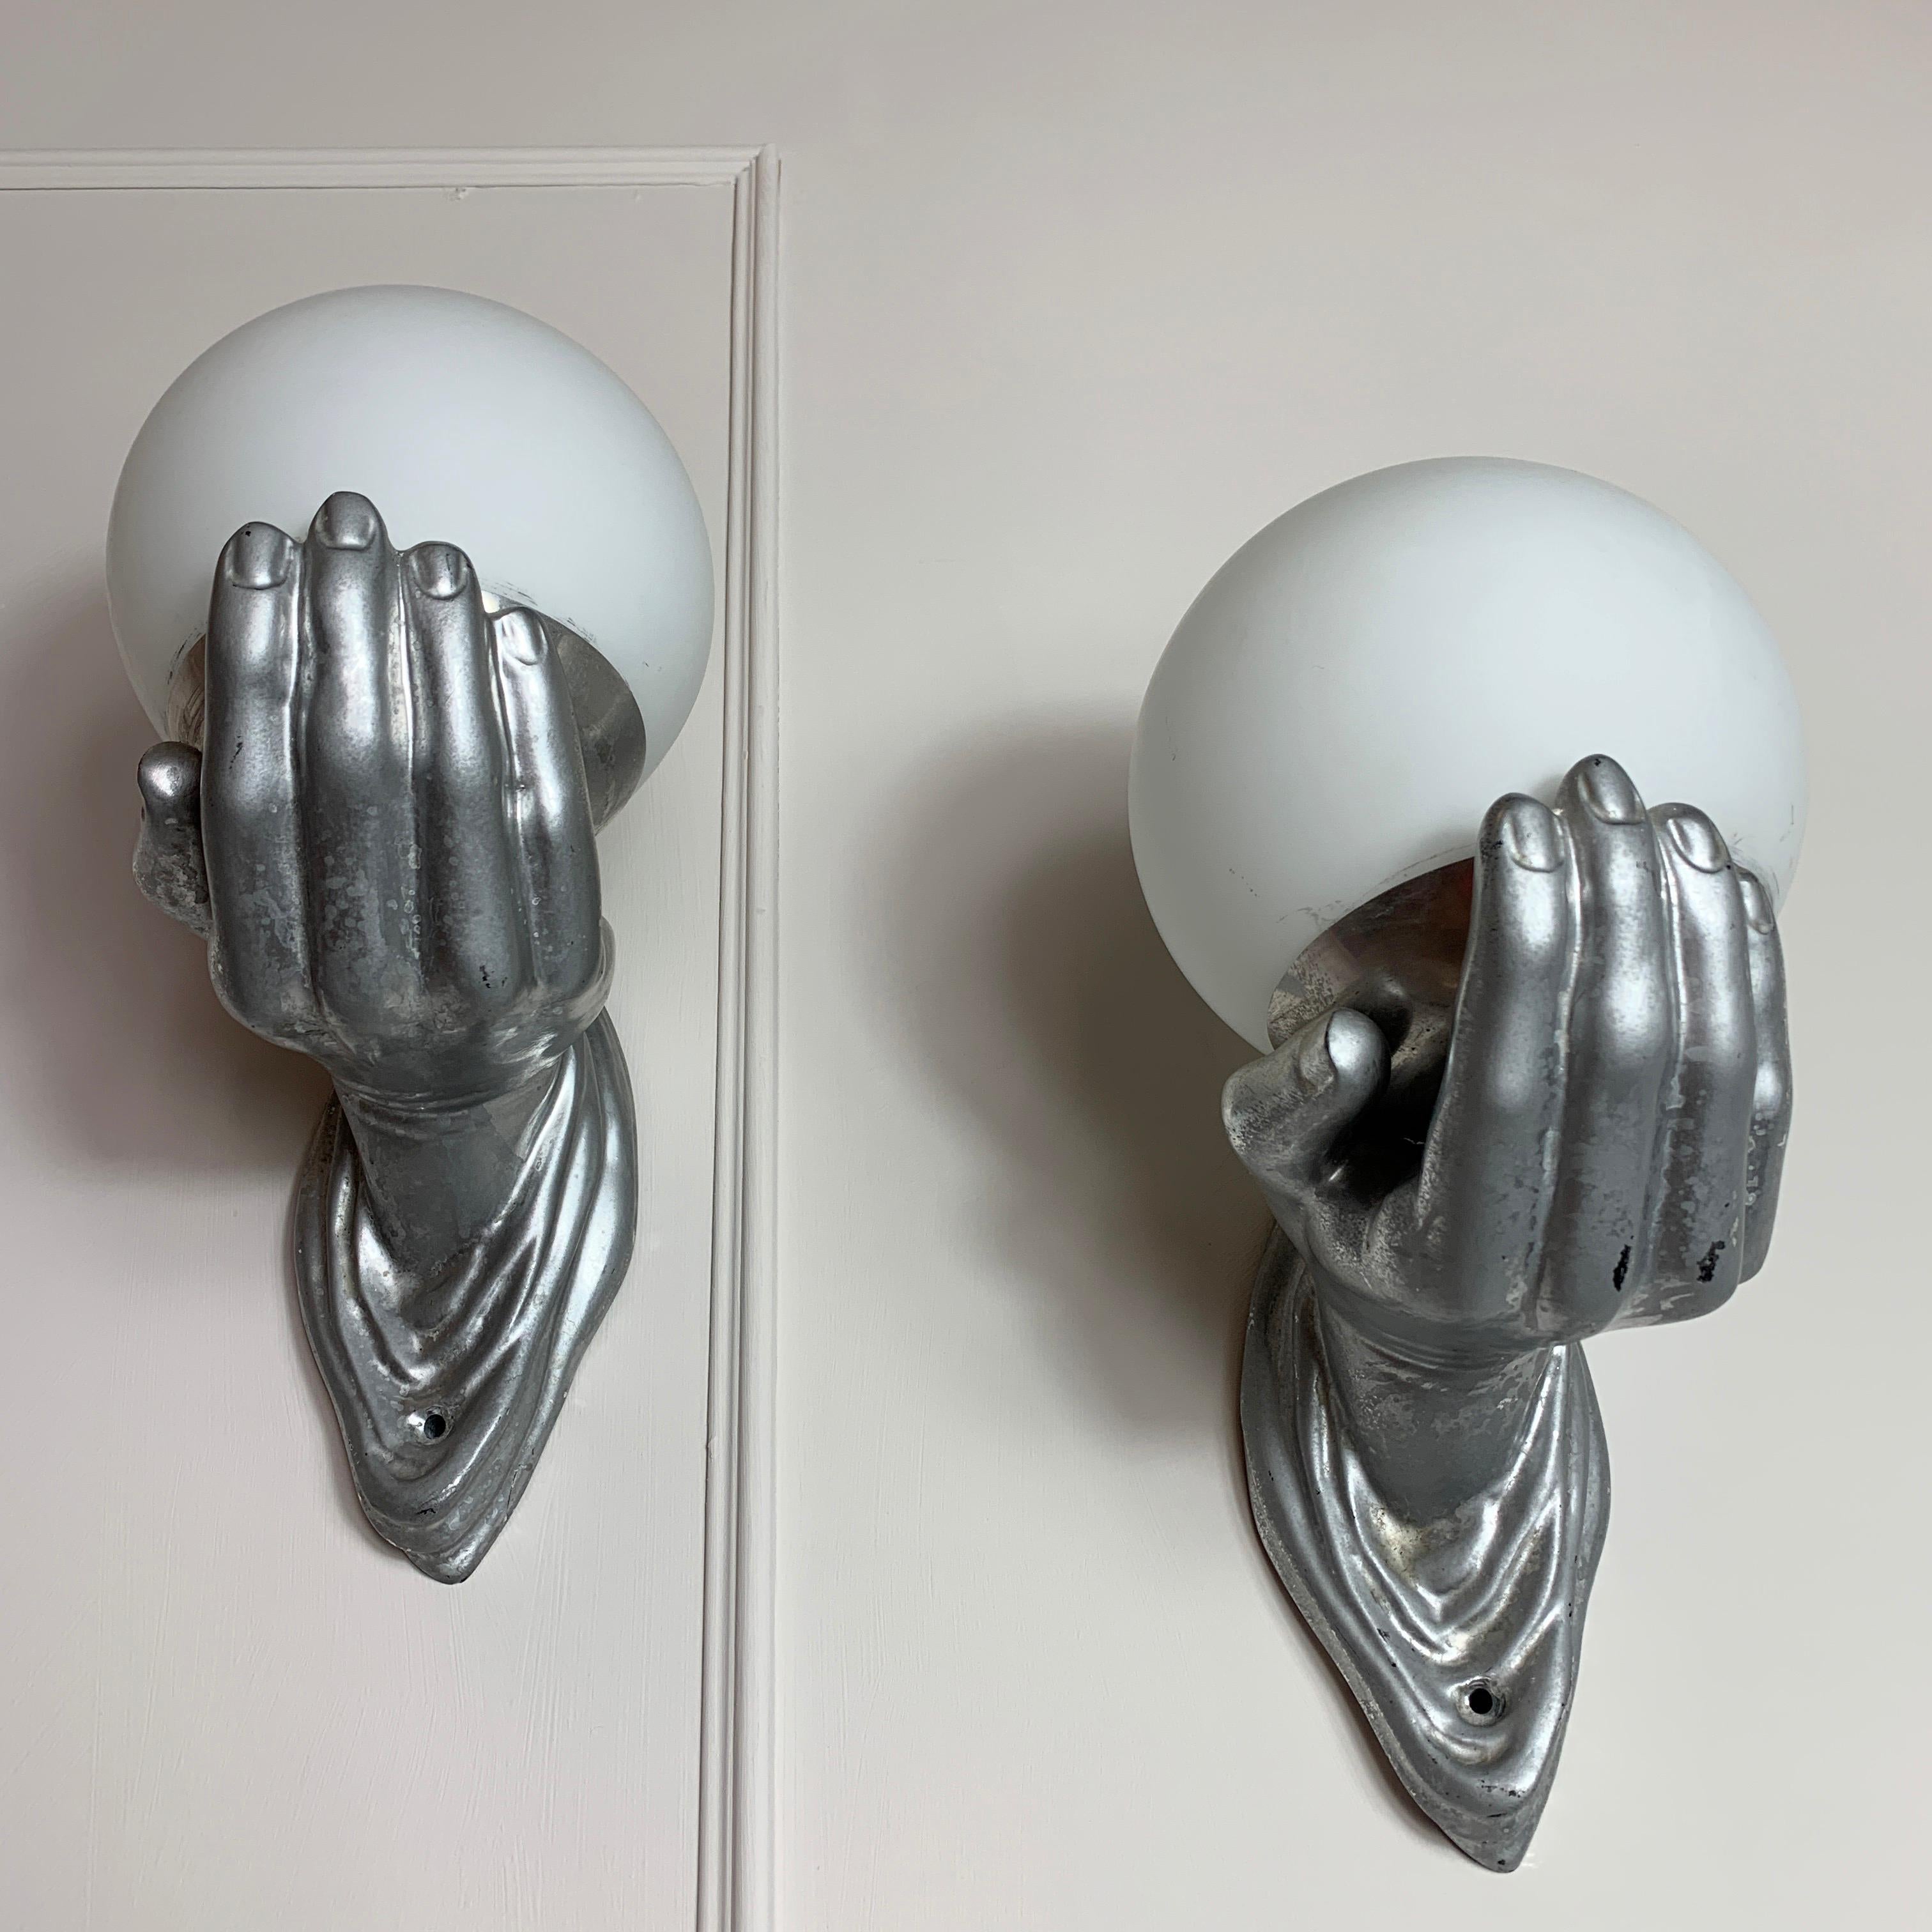 1960s hand and globe wall lights, in the manner of Arlus, France.
This is a great looking pair of wall lights in the design of hands holding globes.
The hands themselves are in bronze with glass globe shades, these shades are held in place with